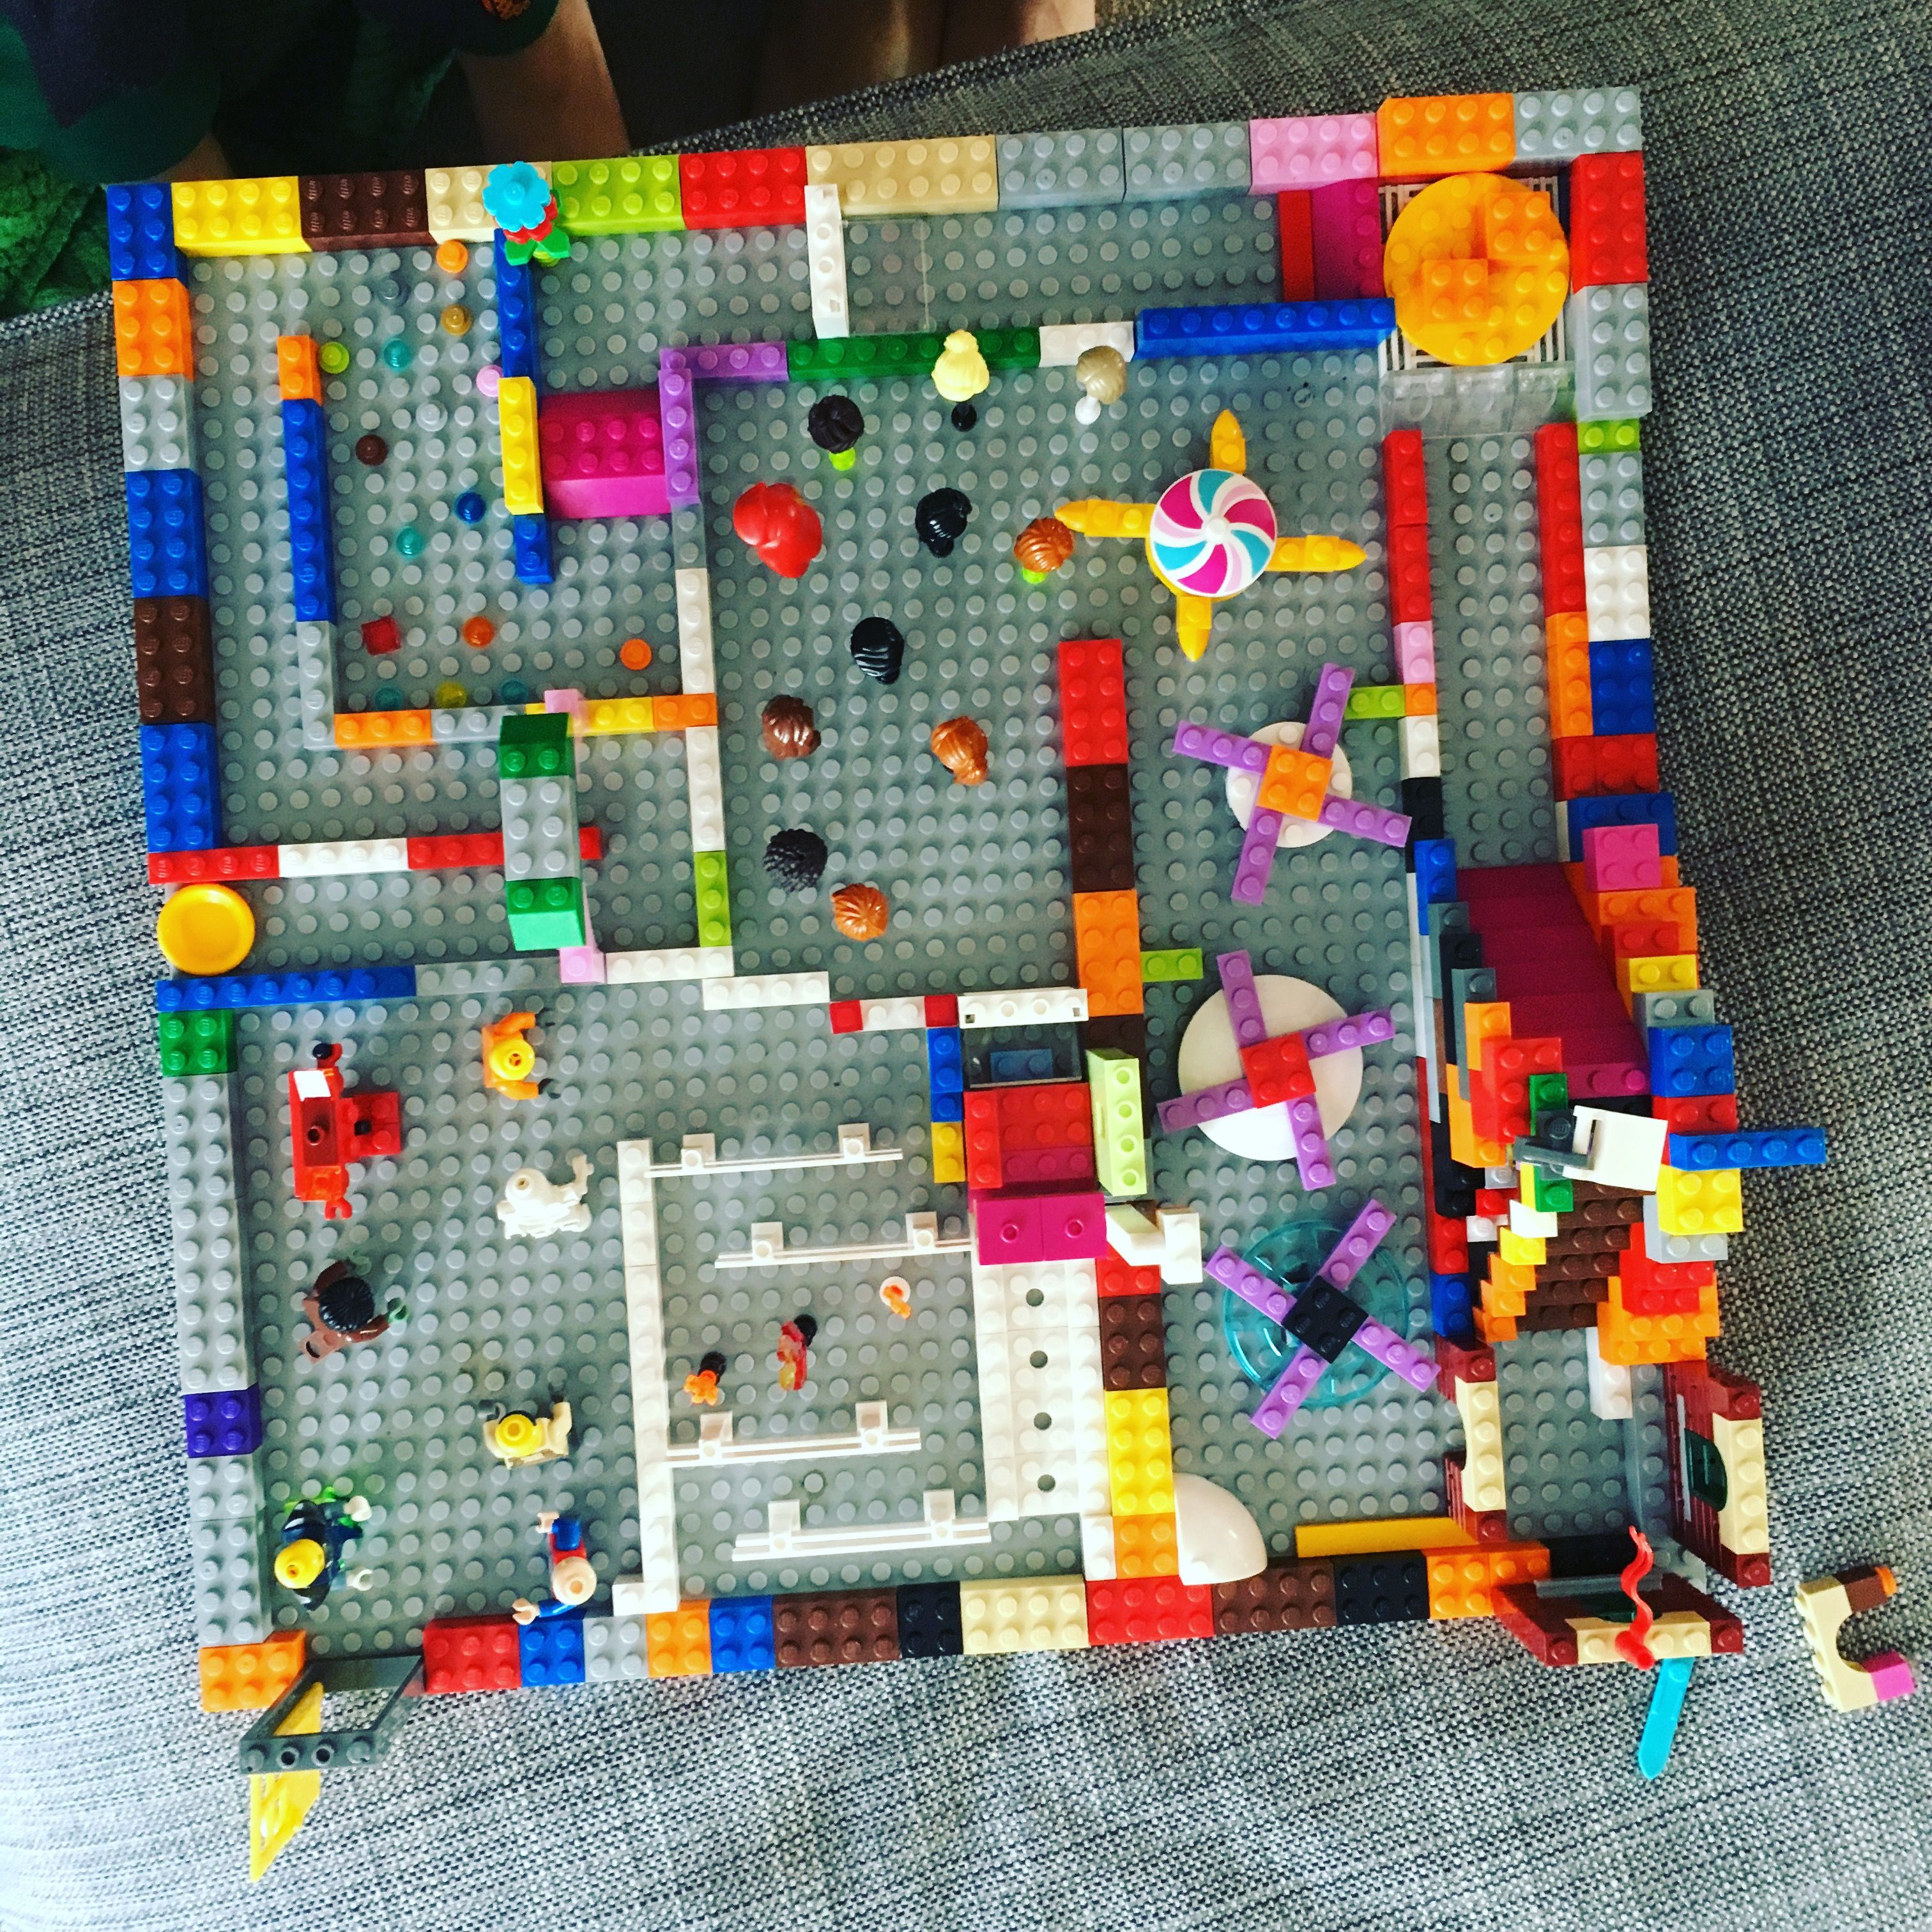 marble run with legos